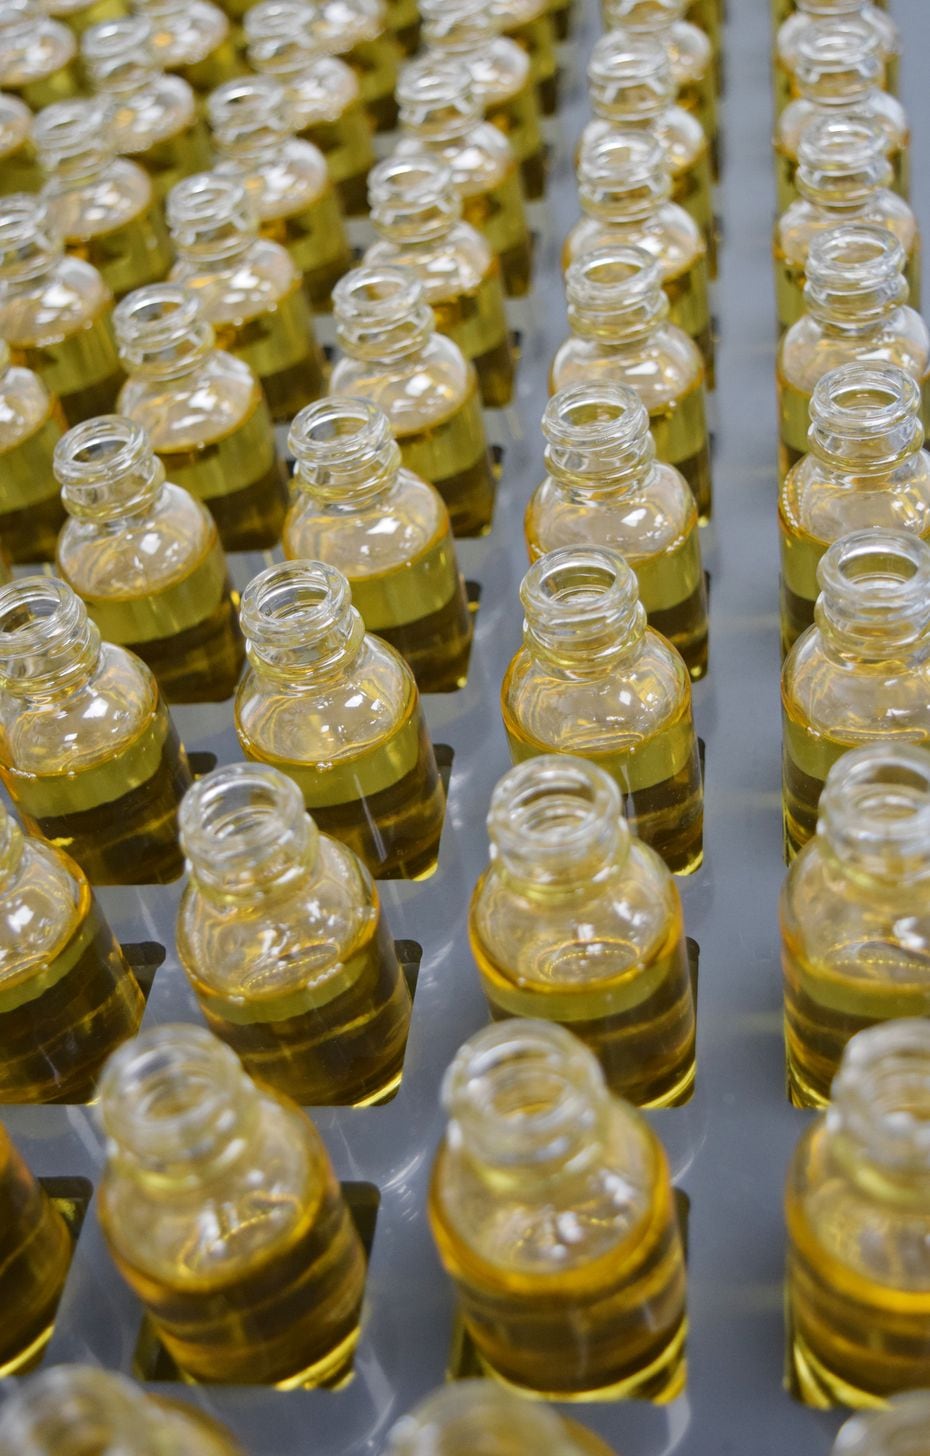 Texas Original's tinctures are being prepared for delivery to its pickup locations around...